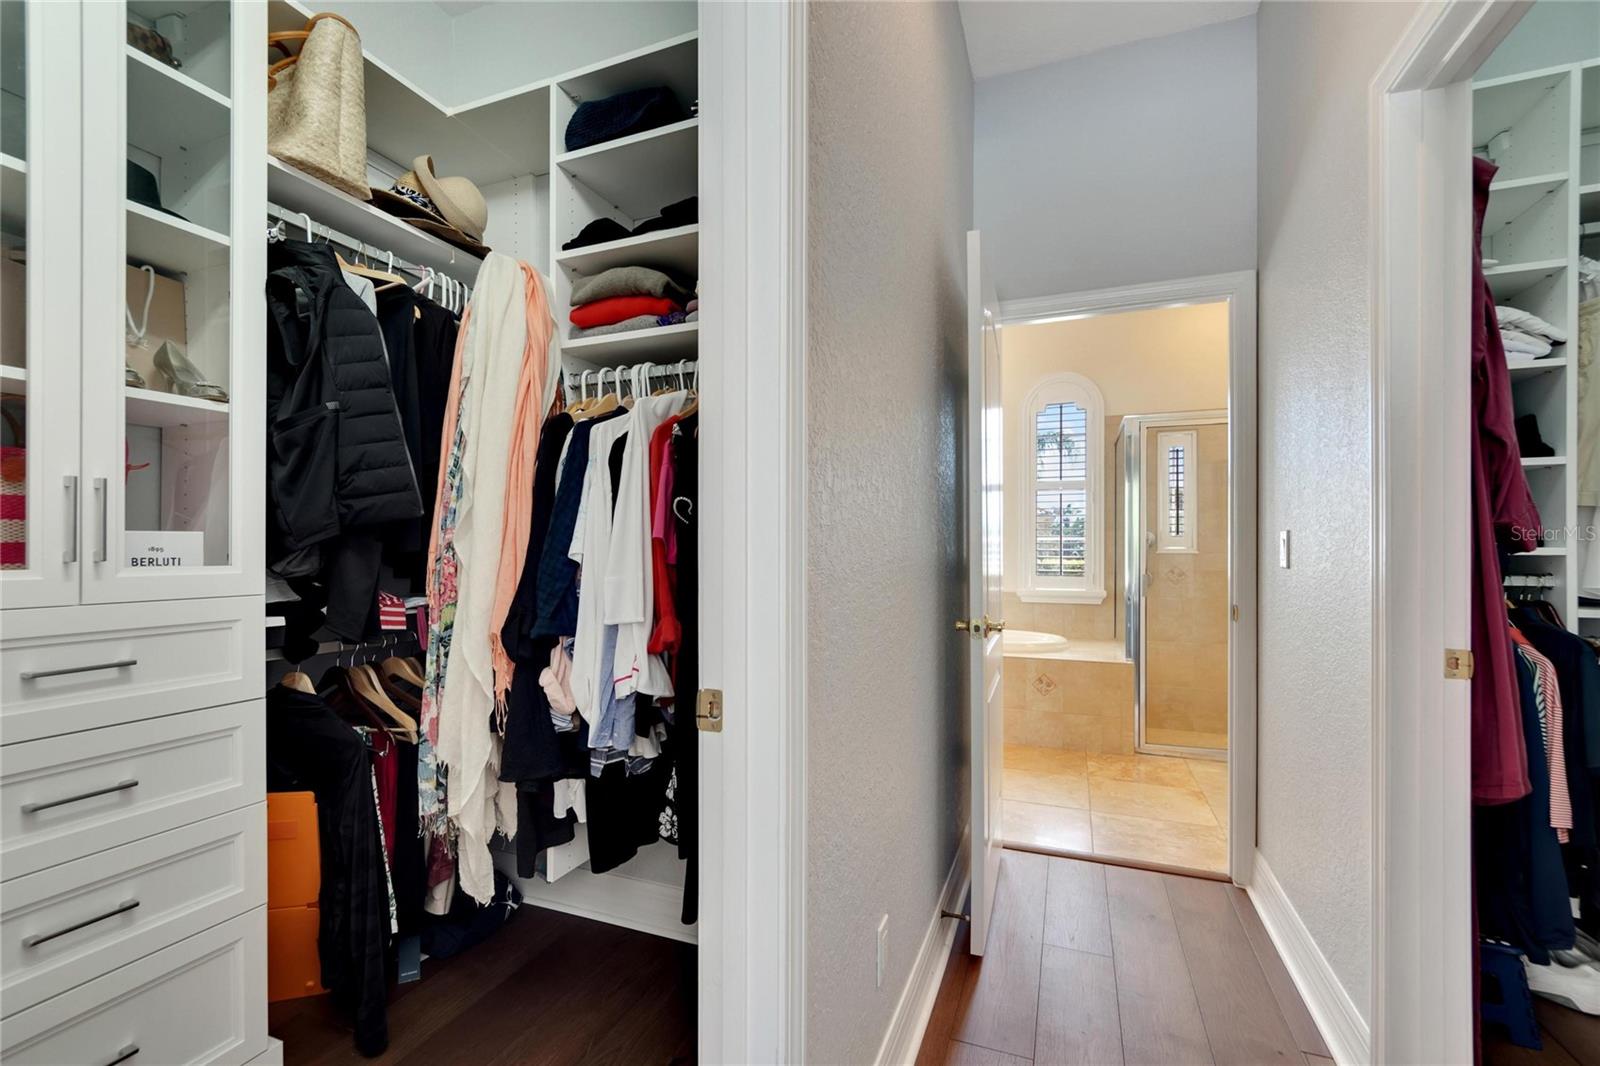 California Closets in both his/her closets.